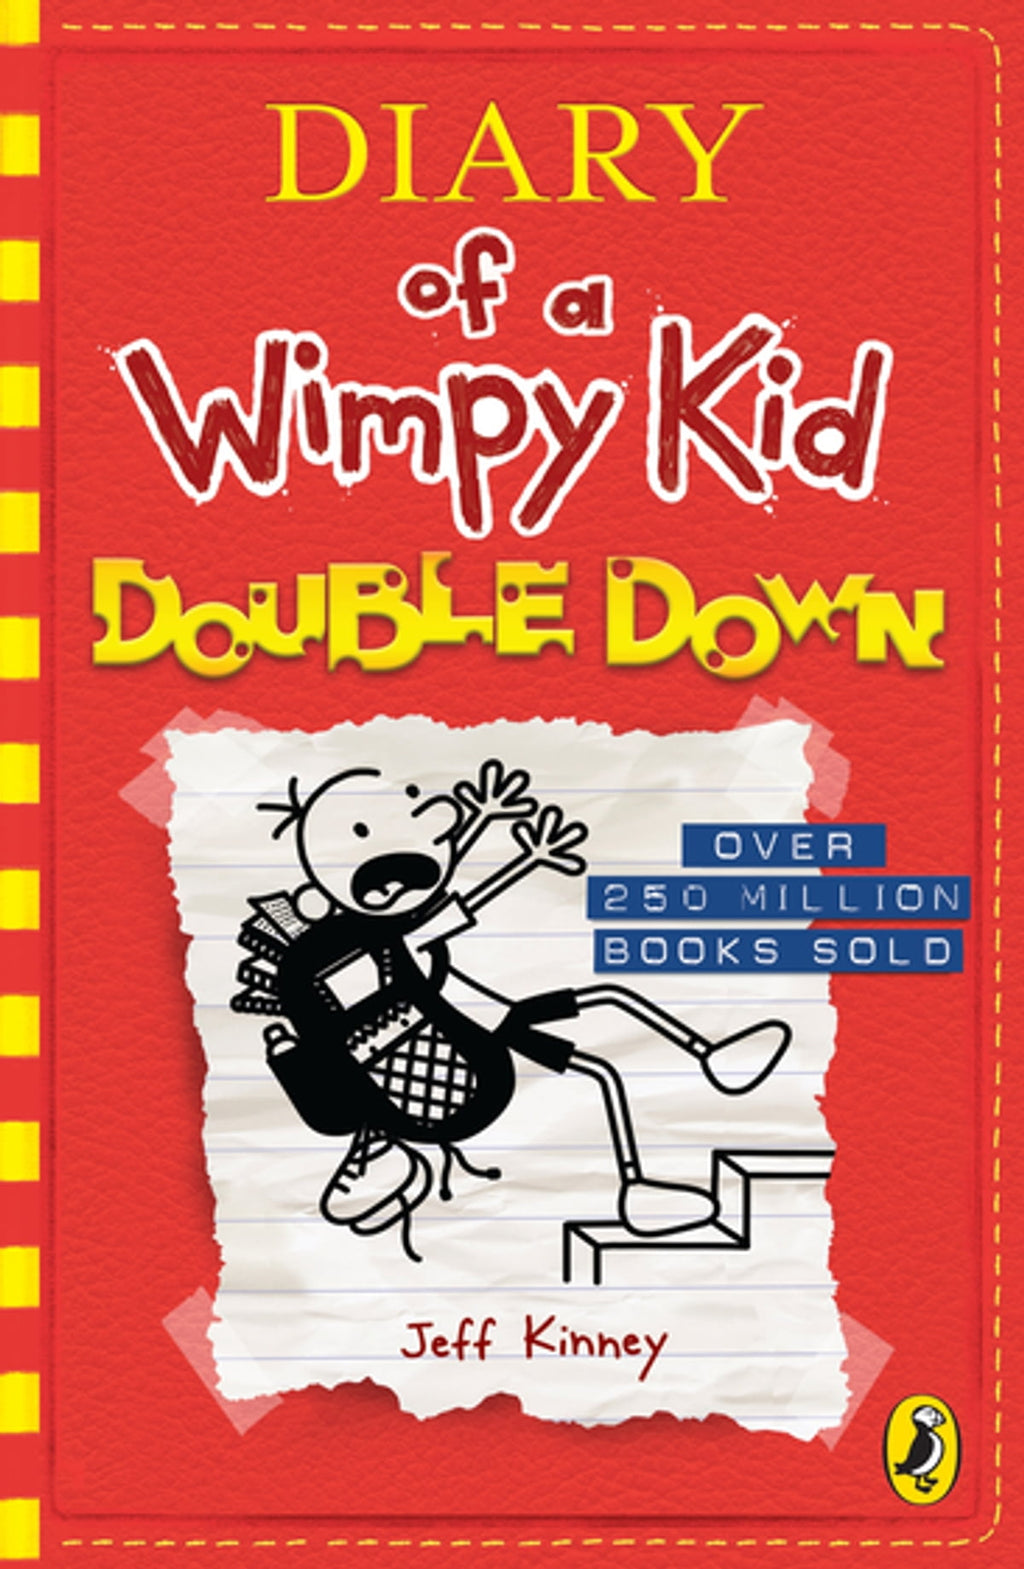 Diary of a Wimpy Kid (12): Double Down